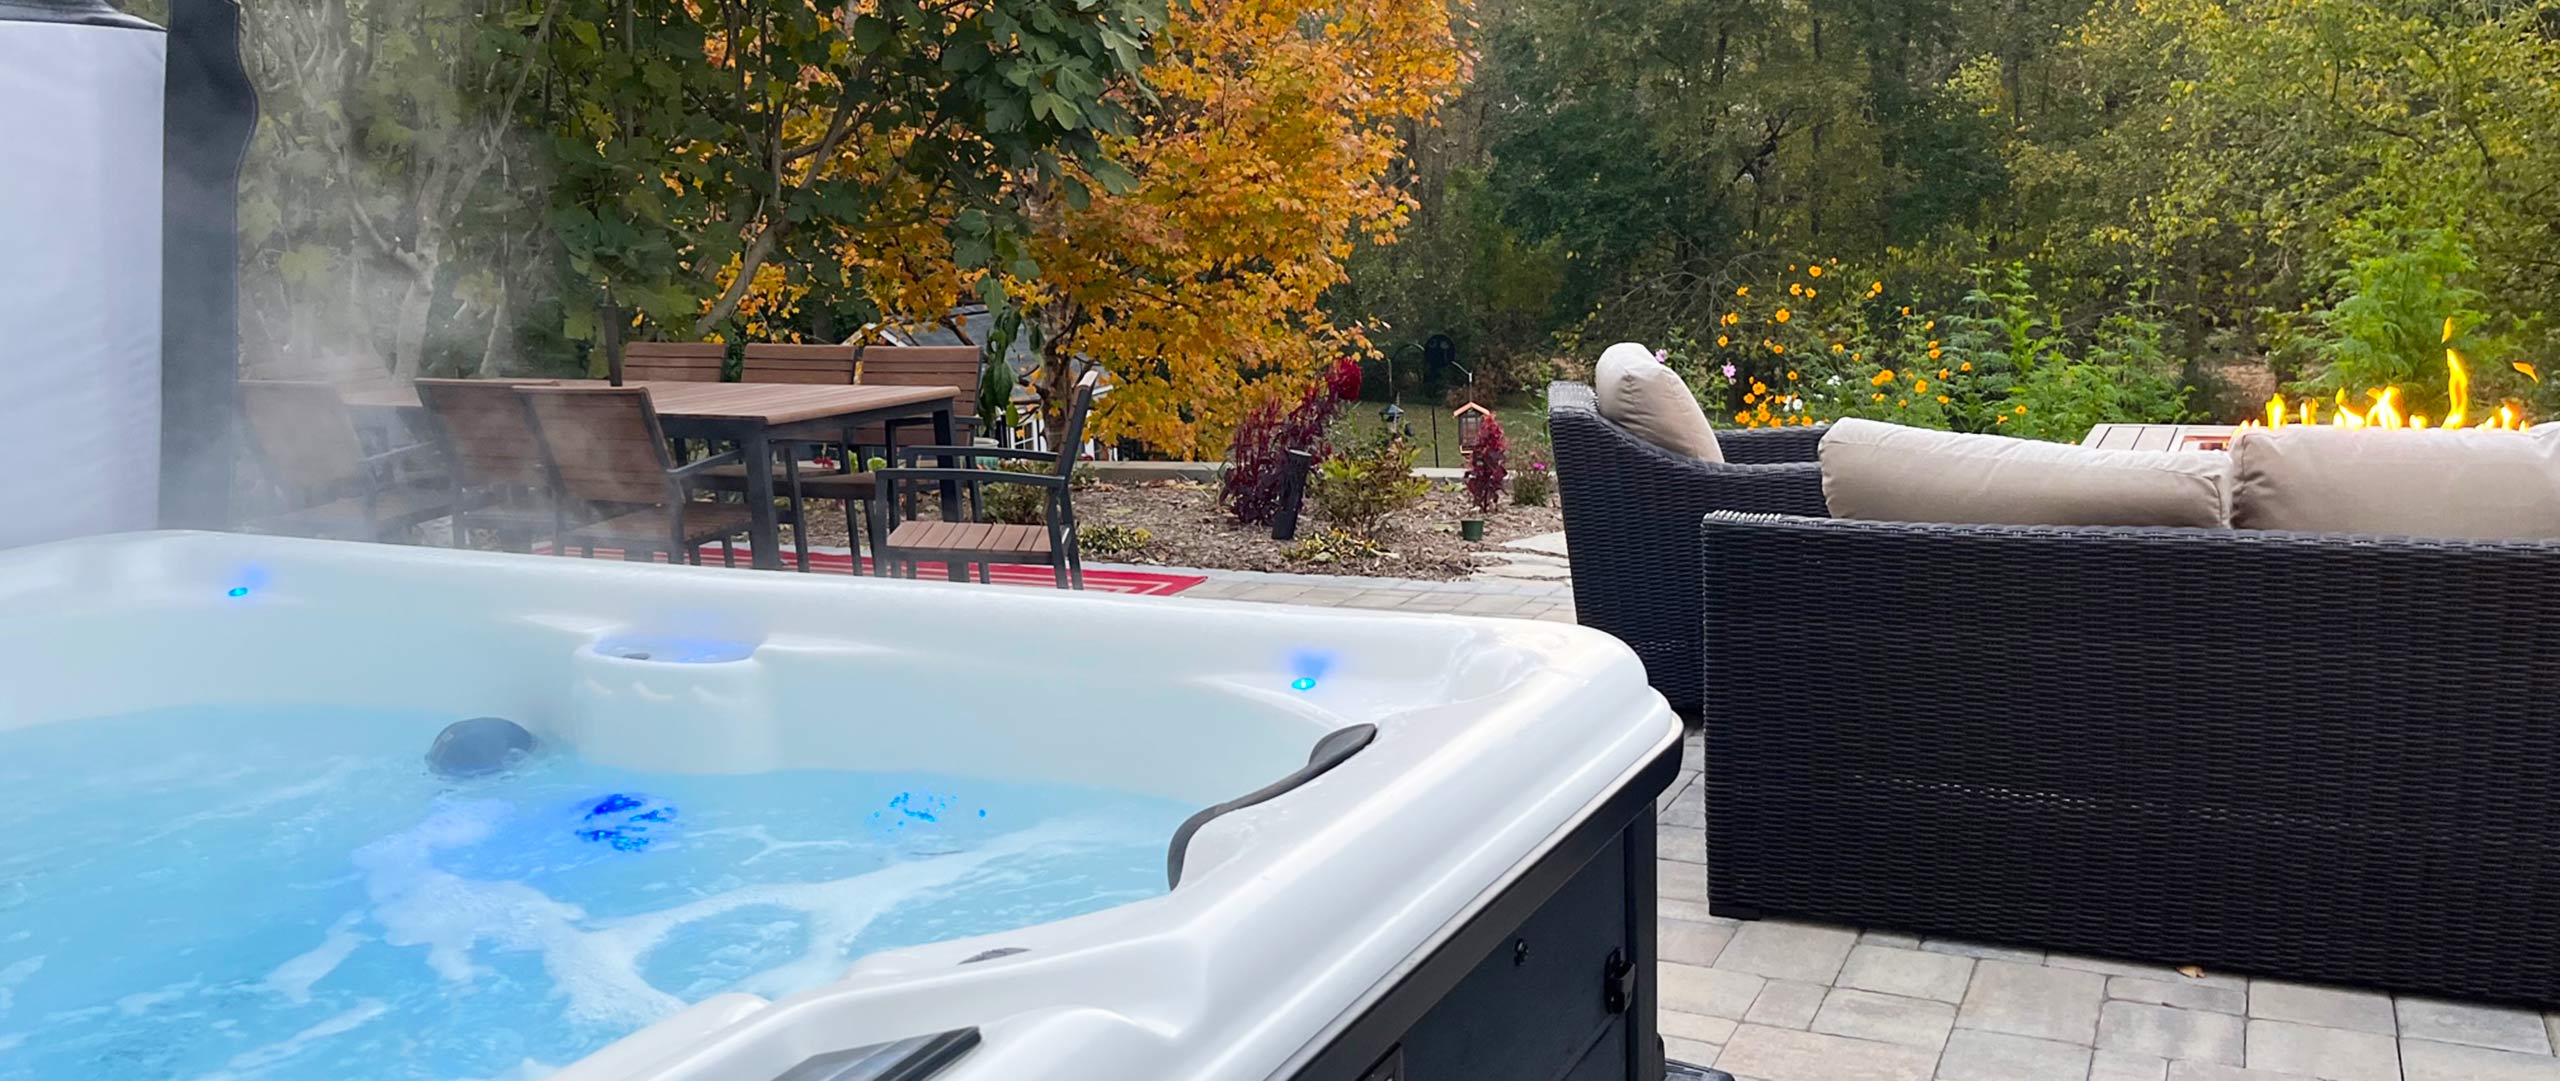 Hot Tubs in the fall